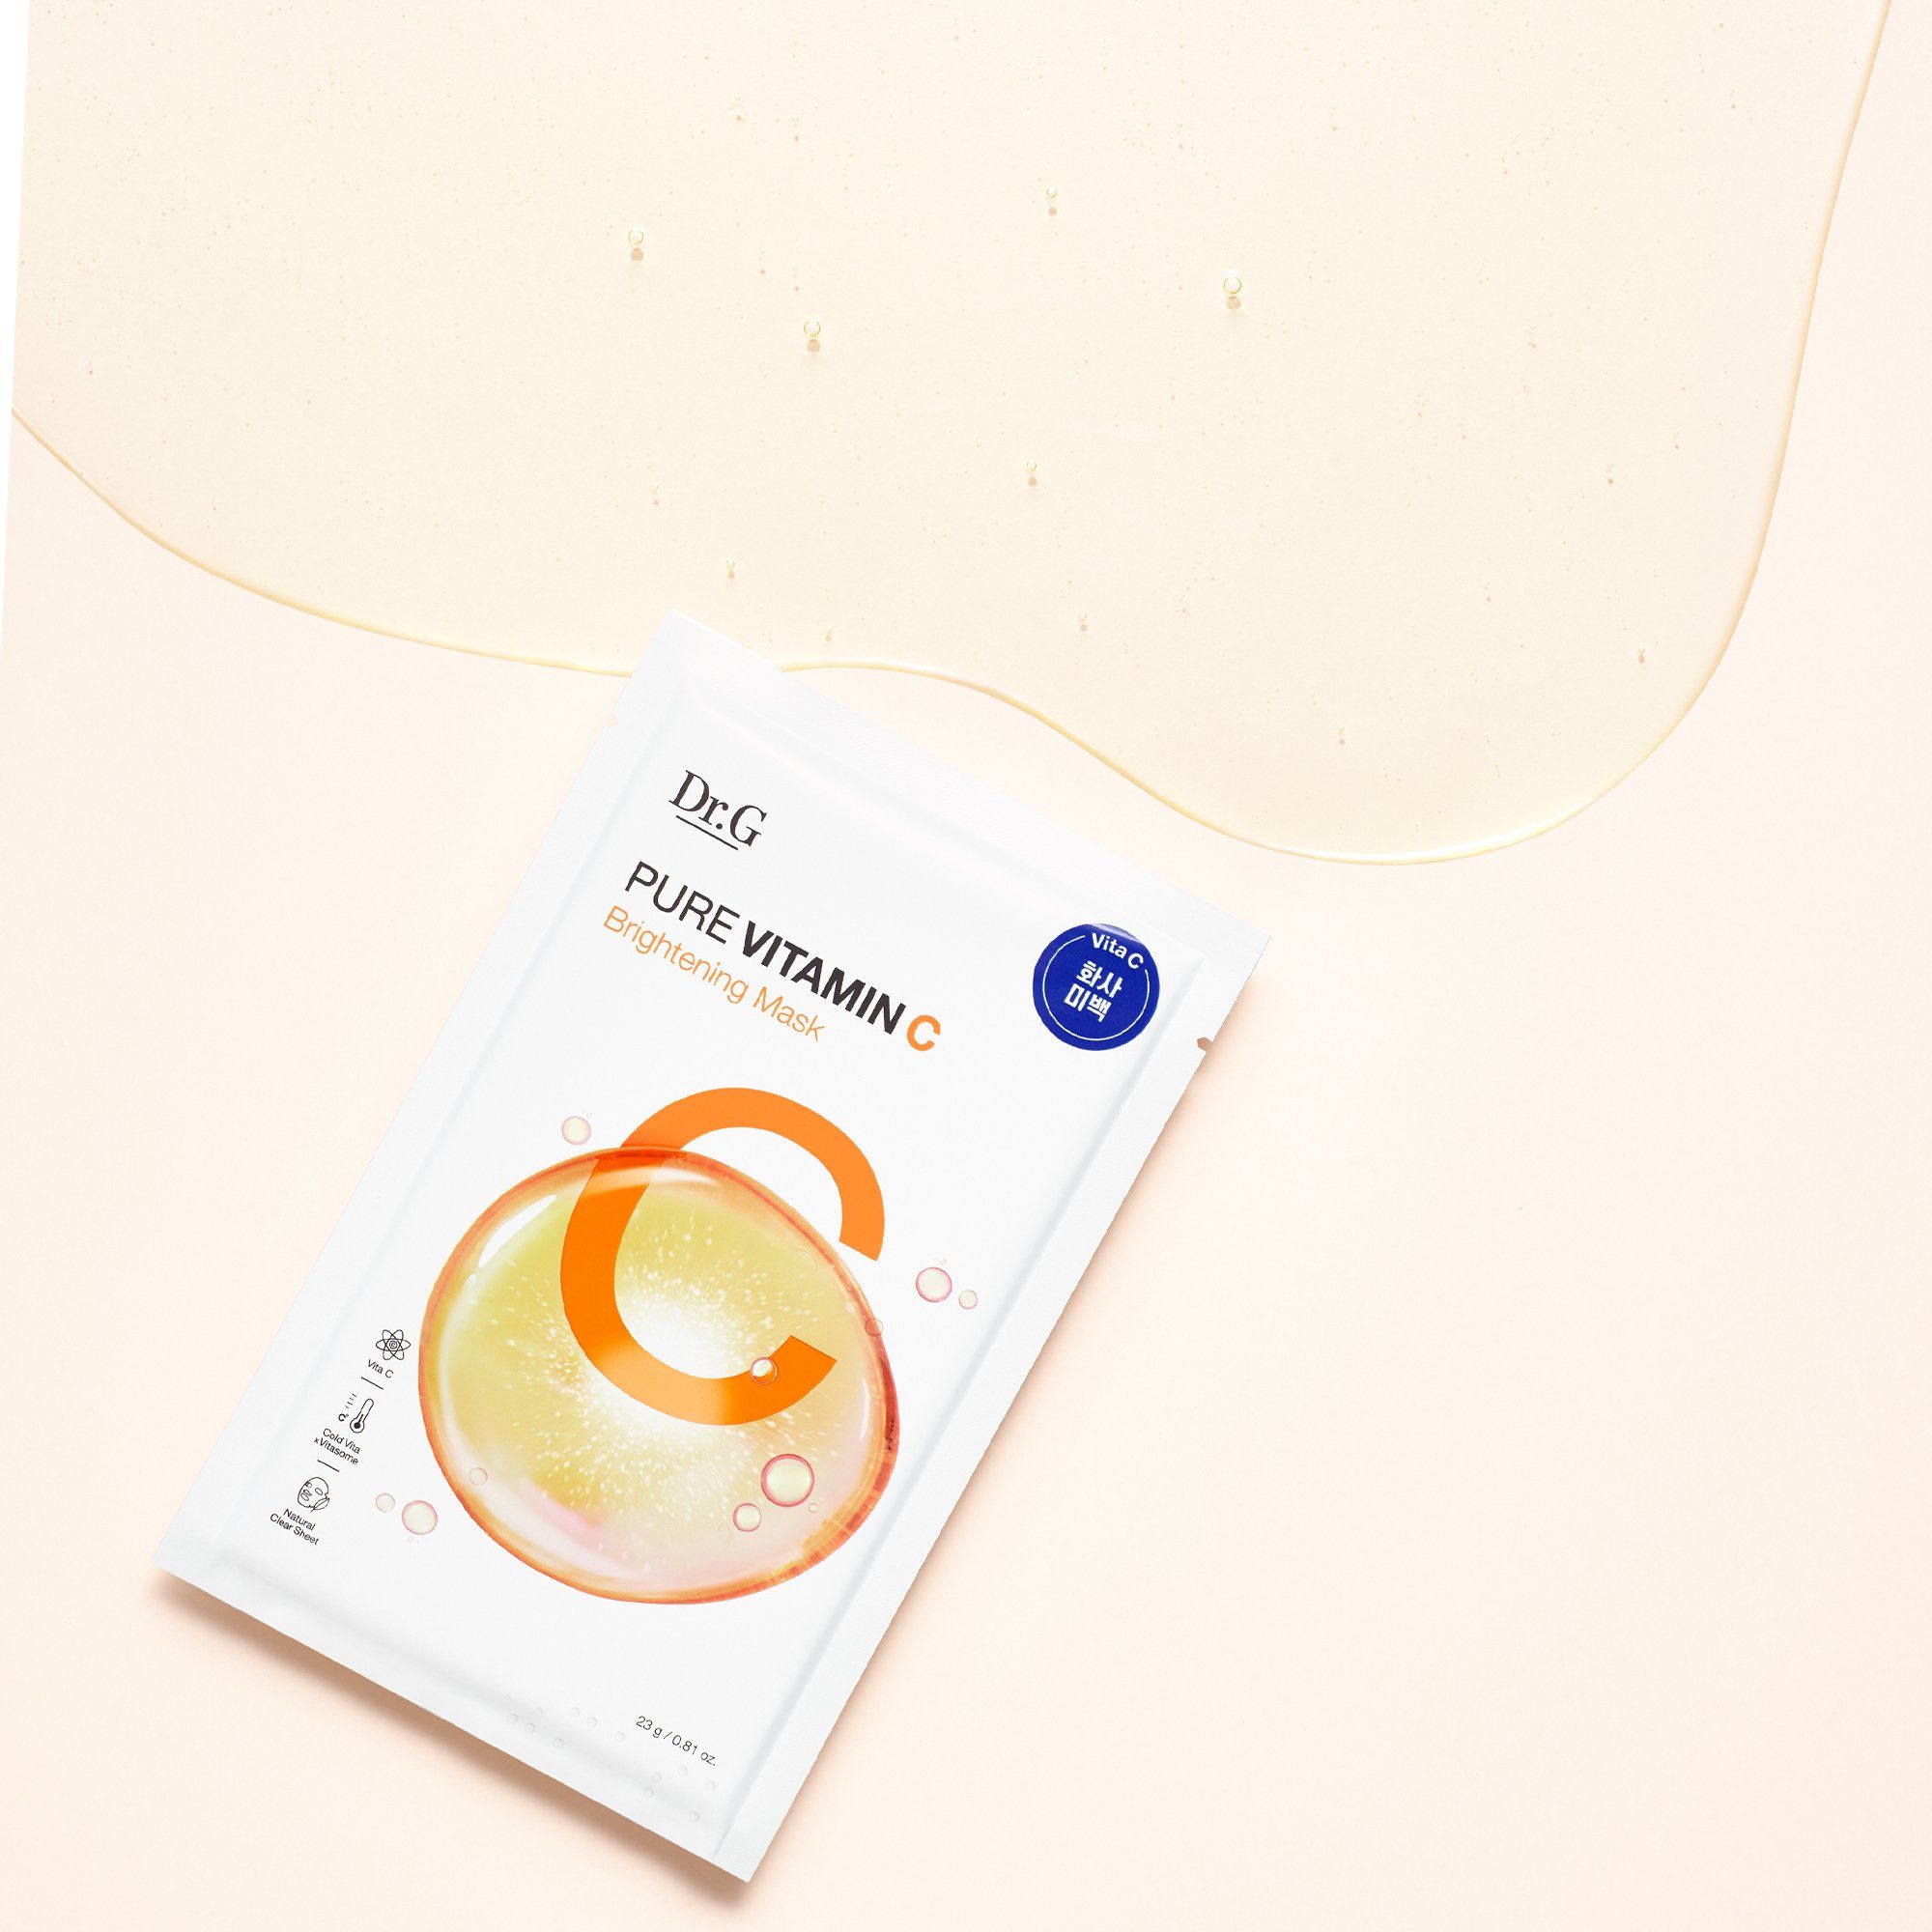  Mặt nạ giấy Dr.G Pure Vitamin C Brightening Mask 23g 